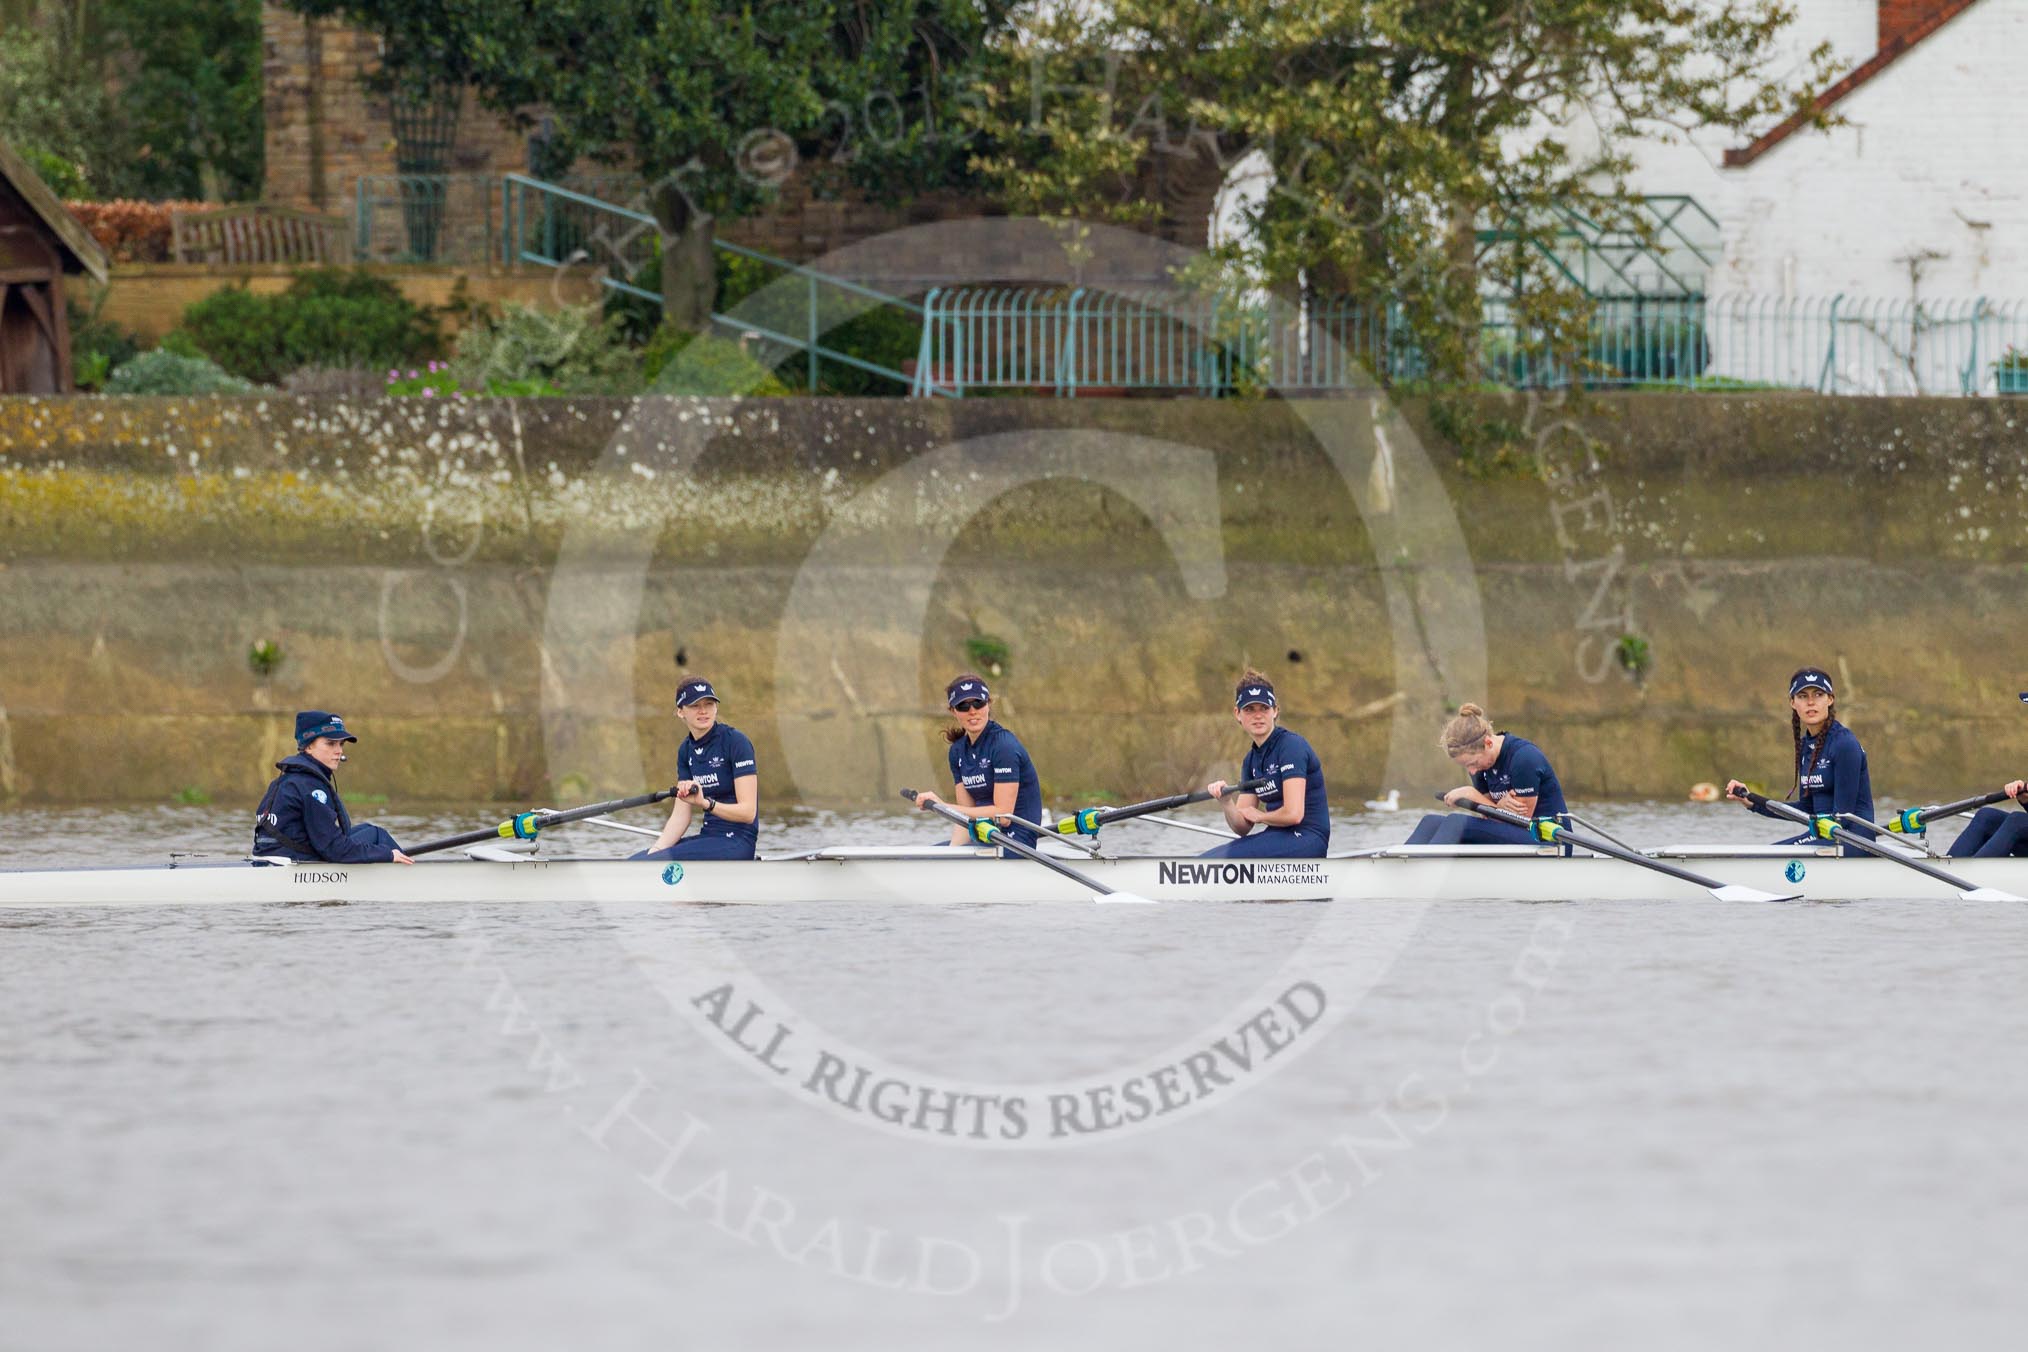 The Boat Race season 2016 - Women's Boat Race Trial Eights (OUWBC, Oxford): "Scylla" waiting for the start of the race, here cox-Morgan Baynham-Williams, stroke-Kate Erickson, 7-Maddy Badcott, 6-Elo Luik, 5-Ruth Siddorn, 4-Emma Spruce.
River Thames between Putney Bridge and Mortlake,
London SW15,

United Kingdom,
on 10 December 2015 at 12:14, image #124